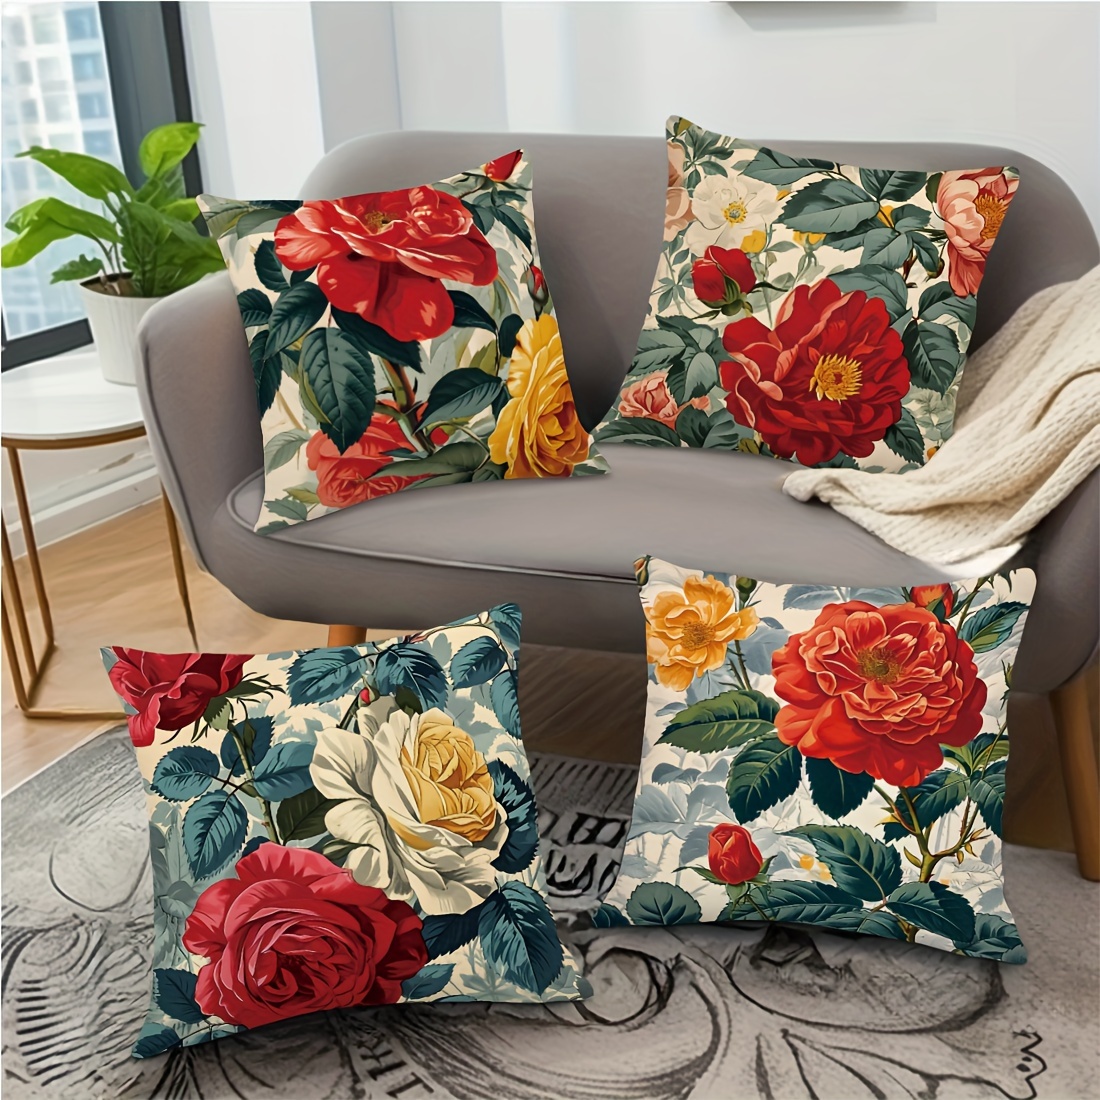 

4pcs, Atmosphere Flower Four-piece Set Peach Leather Throw Pillow Cover, Home Comfortable Pillow Cover, Living Room Bedroom Sofa Cushion Cover